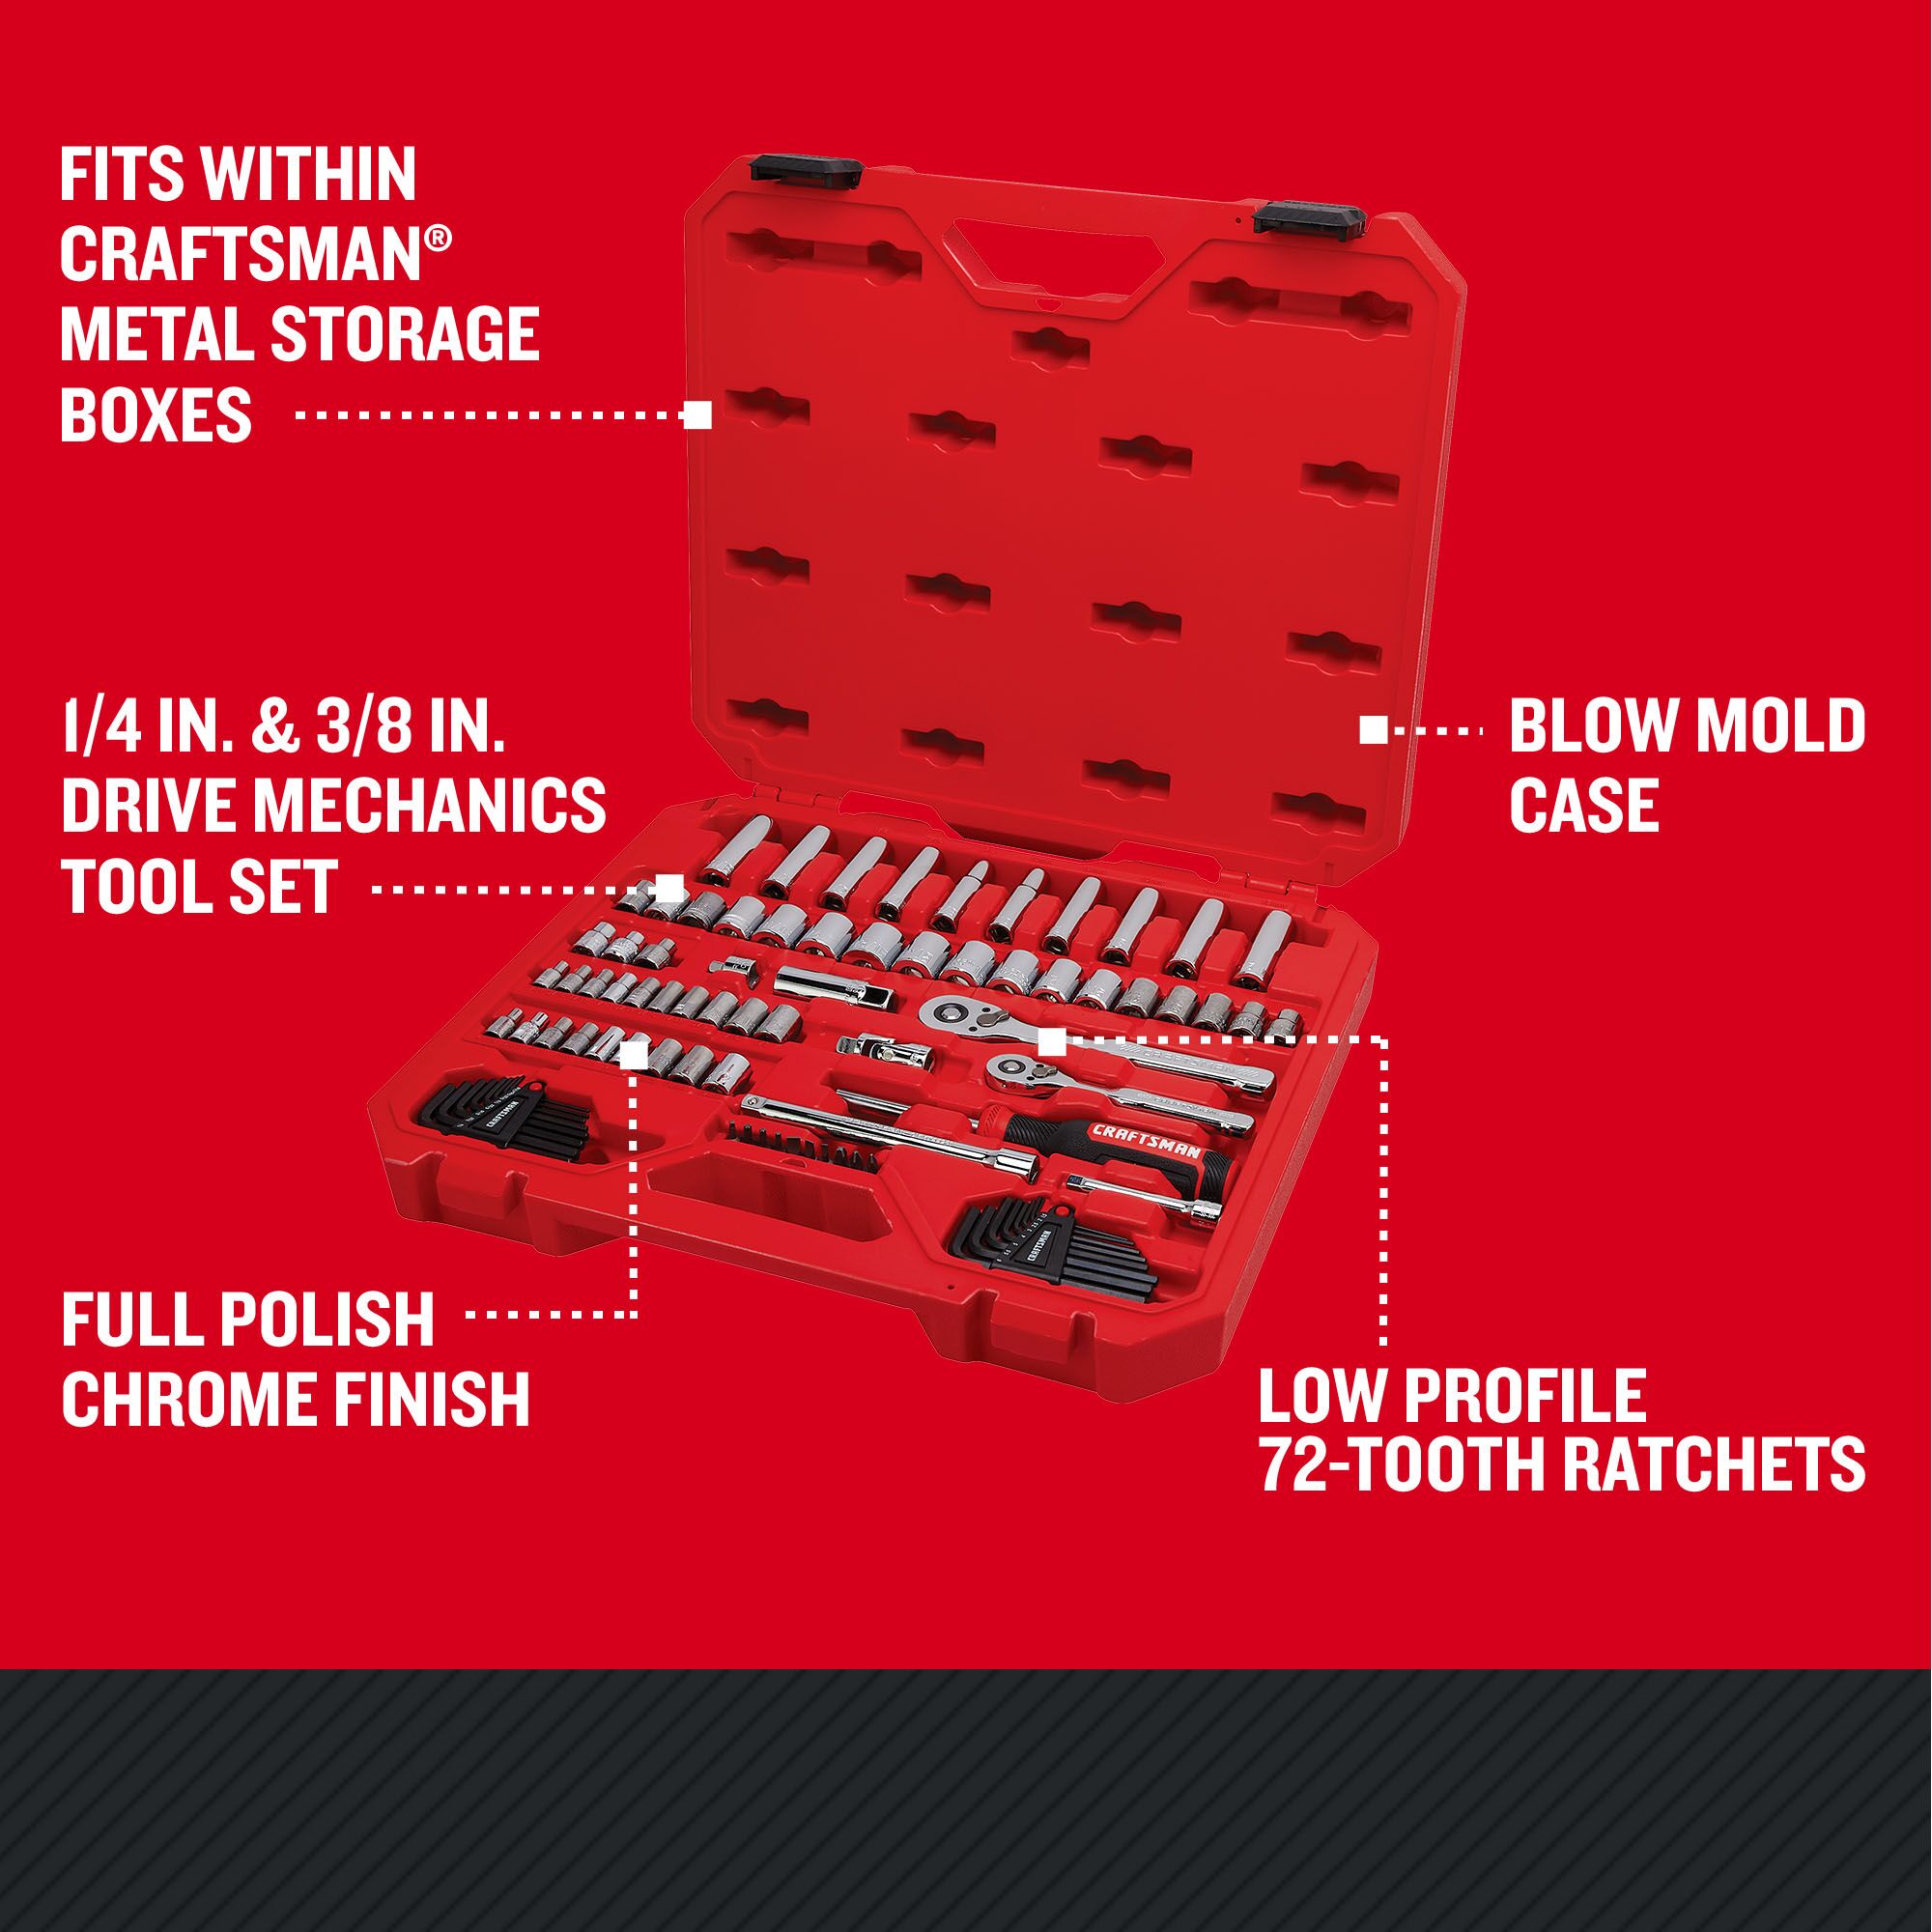 CRAFTSMAN Low Profile 83 piece MECHANICS TOOL SET with features and benefits highlighted